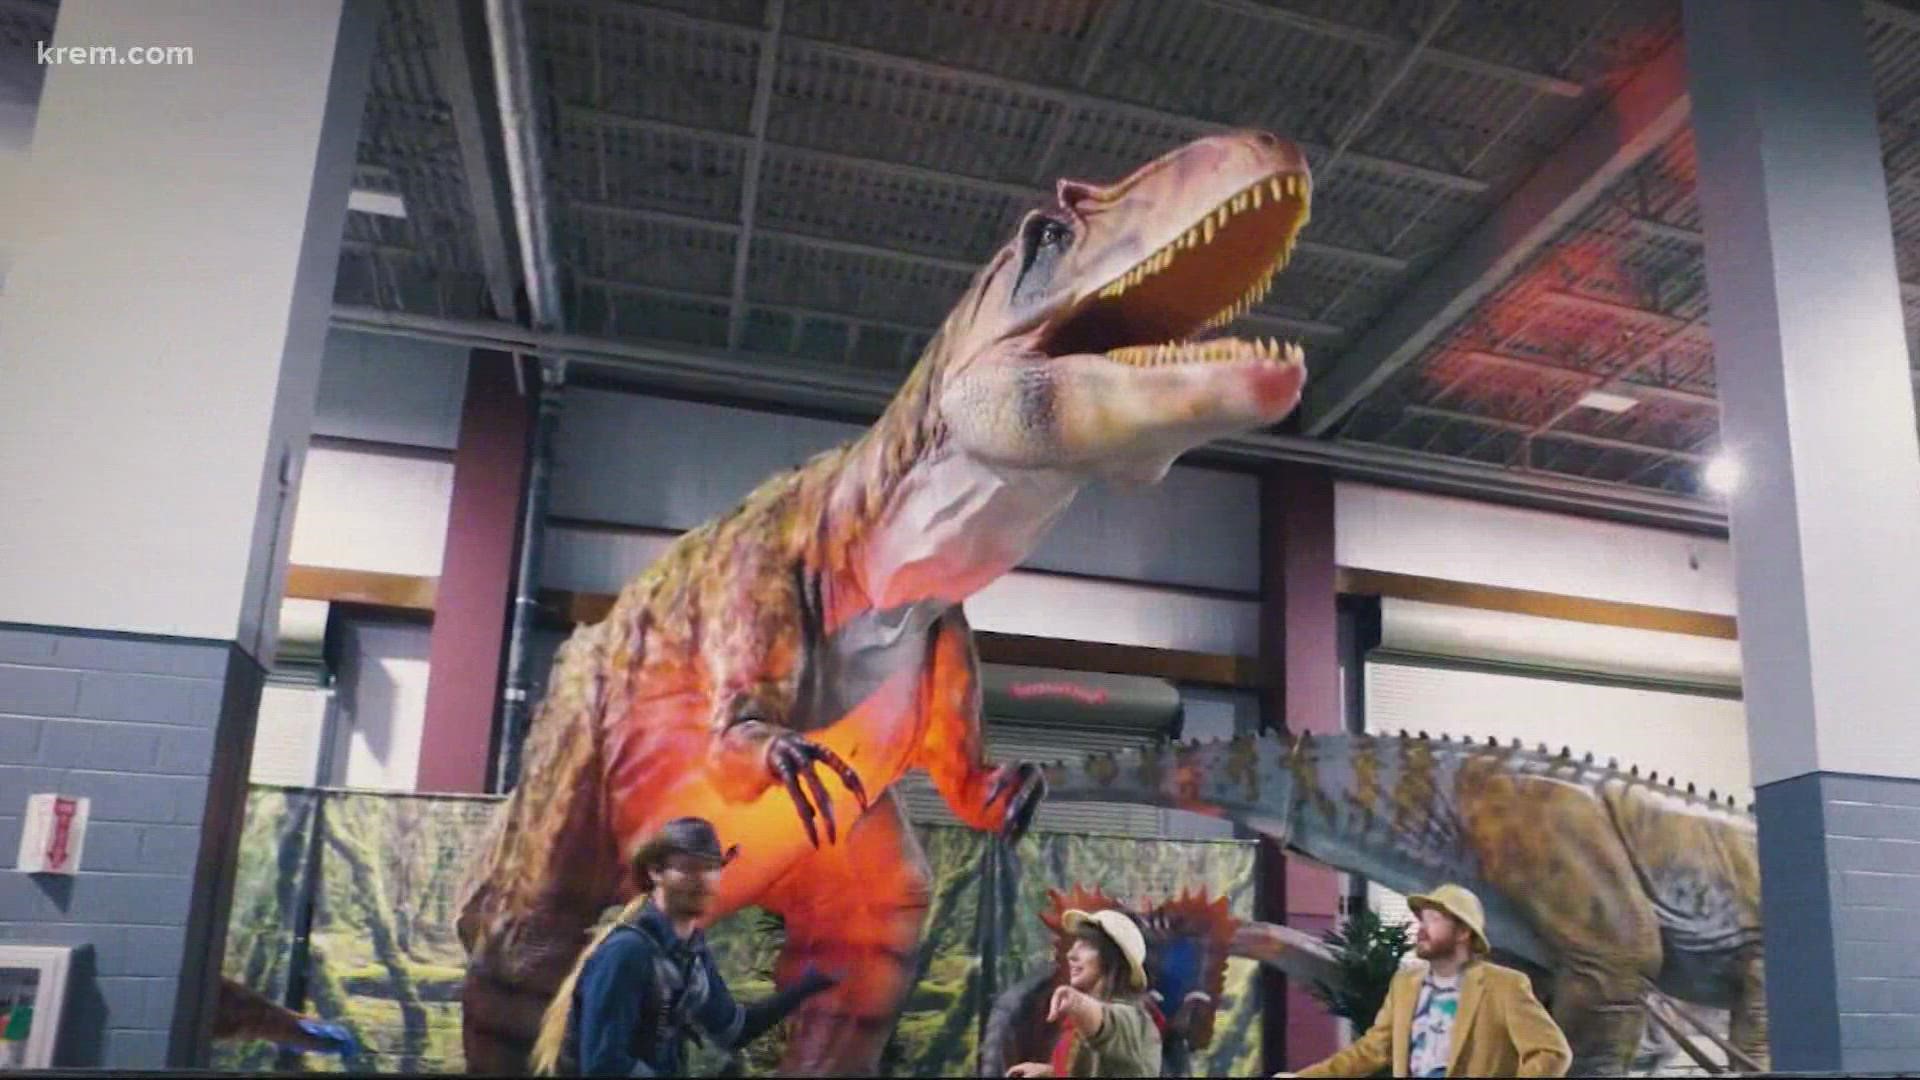 Jurassic Quest brings family fun to the inland northwest